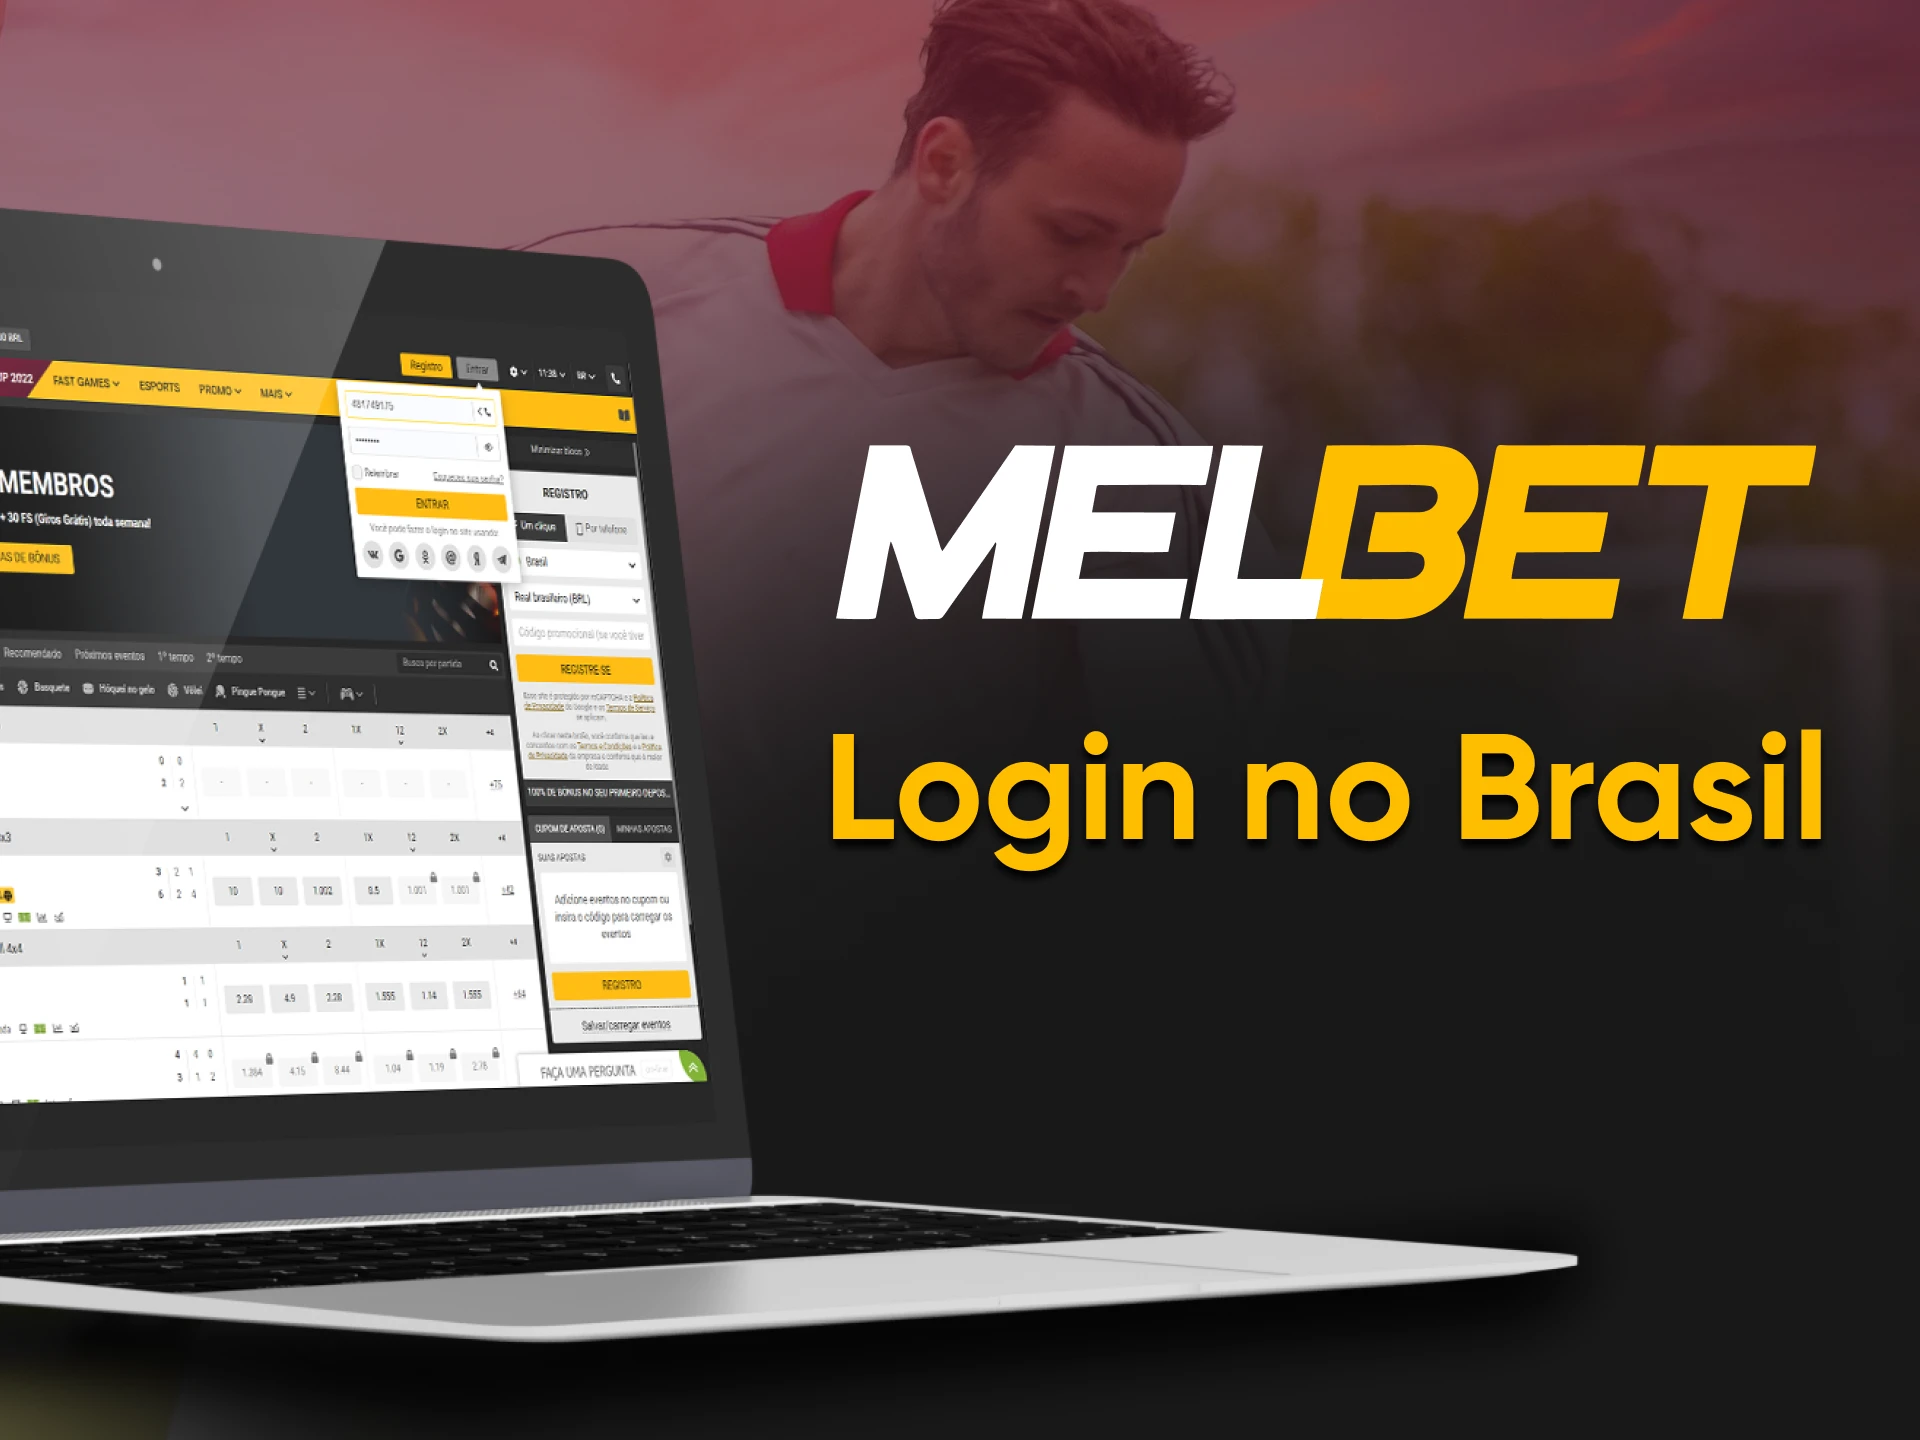 You must be logged in to use the Melbet website.